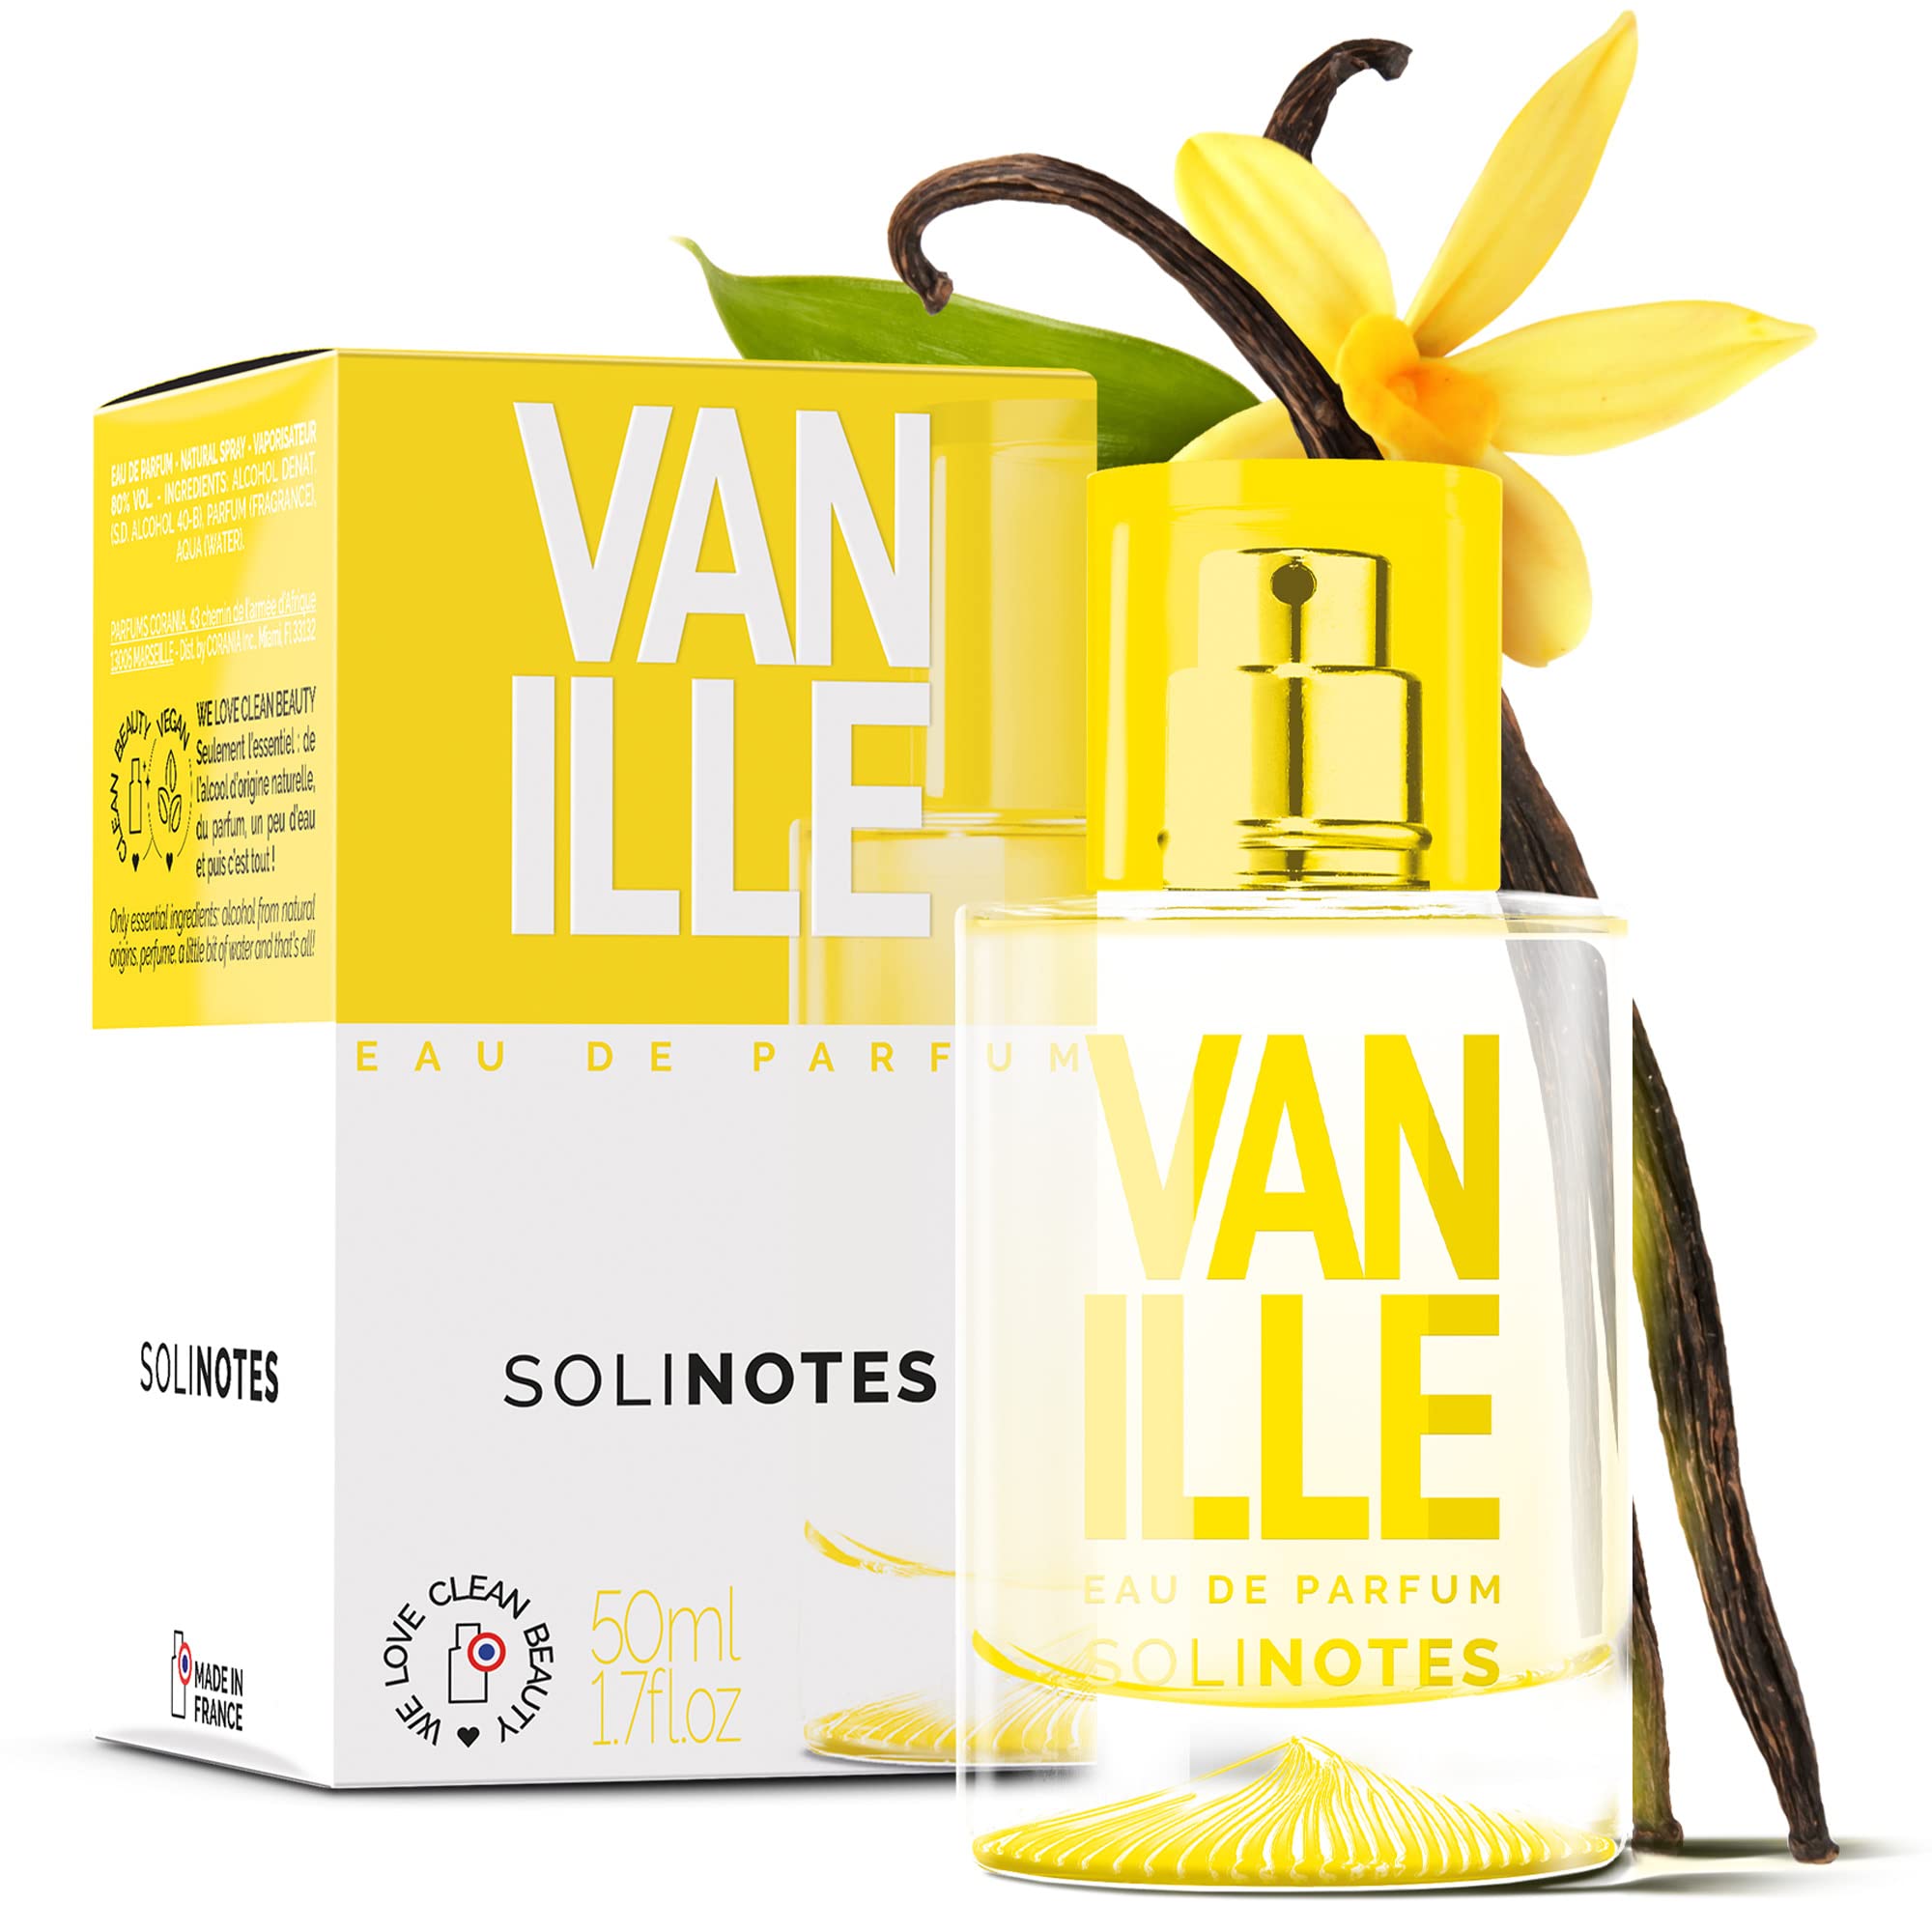 Solinotes Paris SOLINOTES Vanilla Perfume for Women - Eau De Parfum | Delicate Floral and Soothing Scent - Made in France - Vegan - 1.7 fl.oz